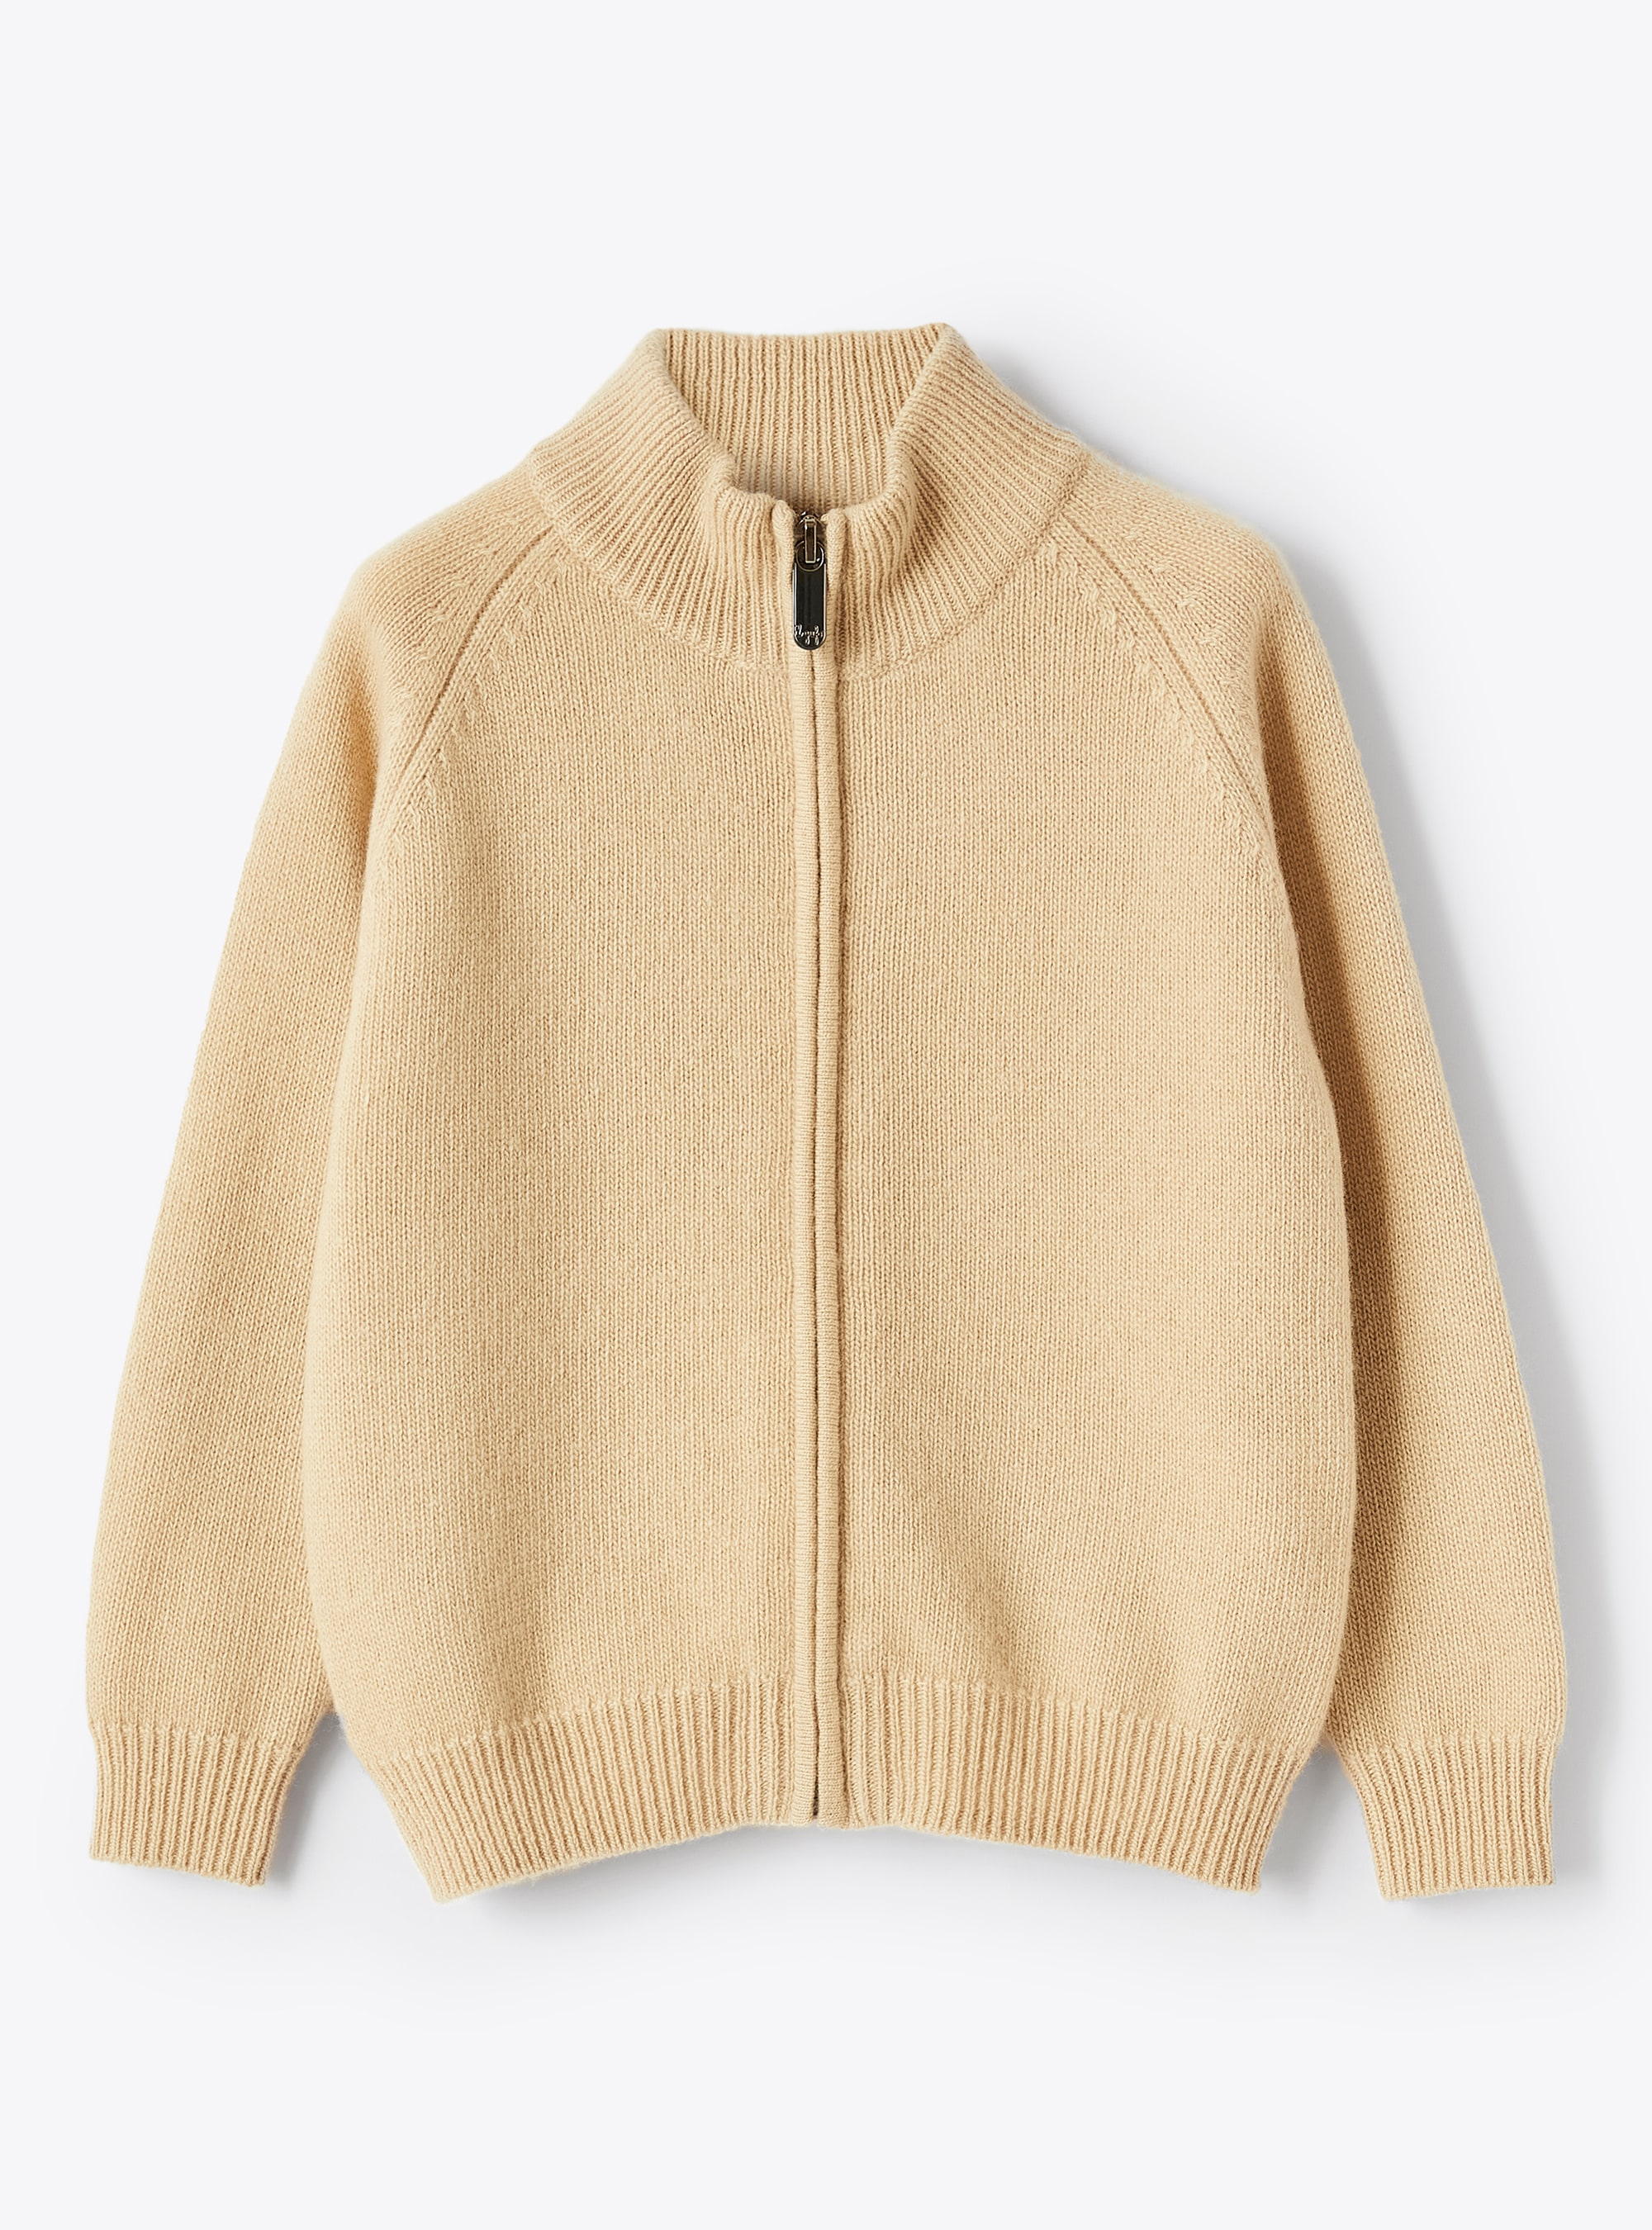 Merino wool cardigan with patches - Beige | Il Gufo